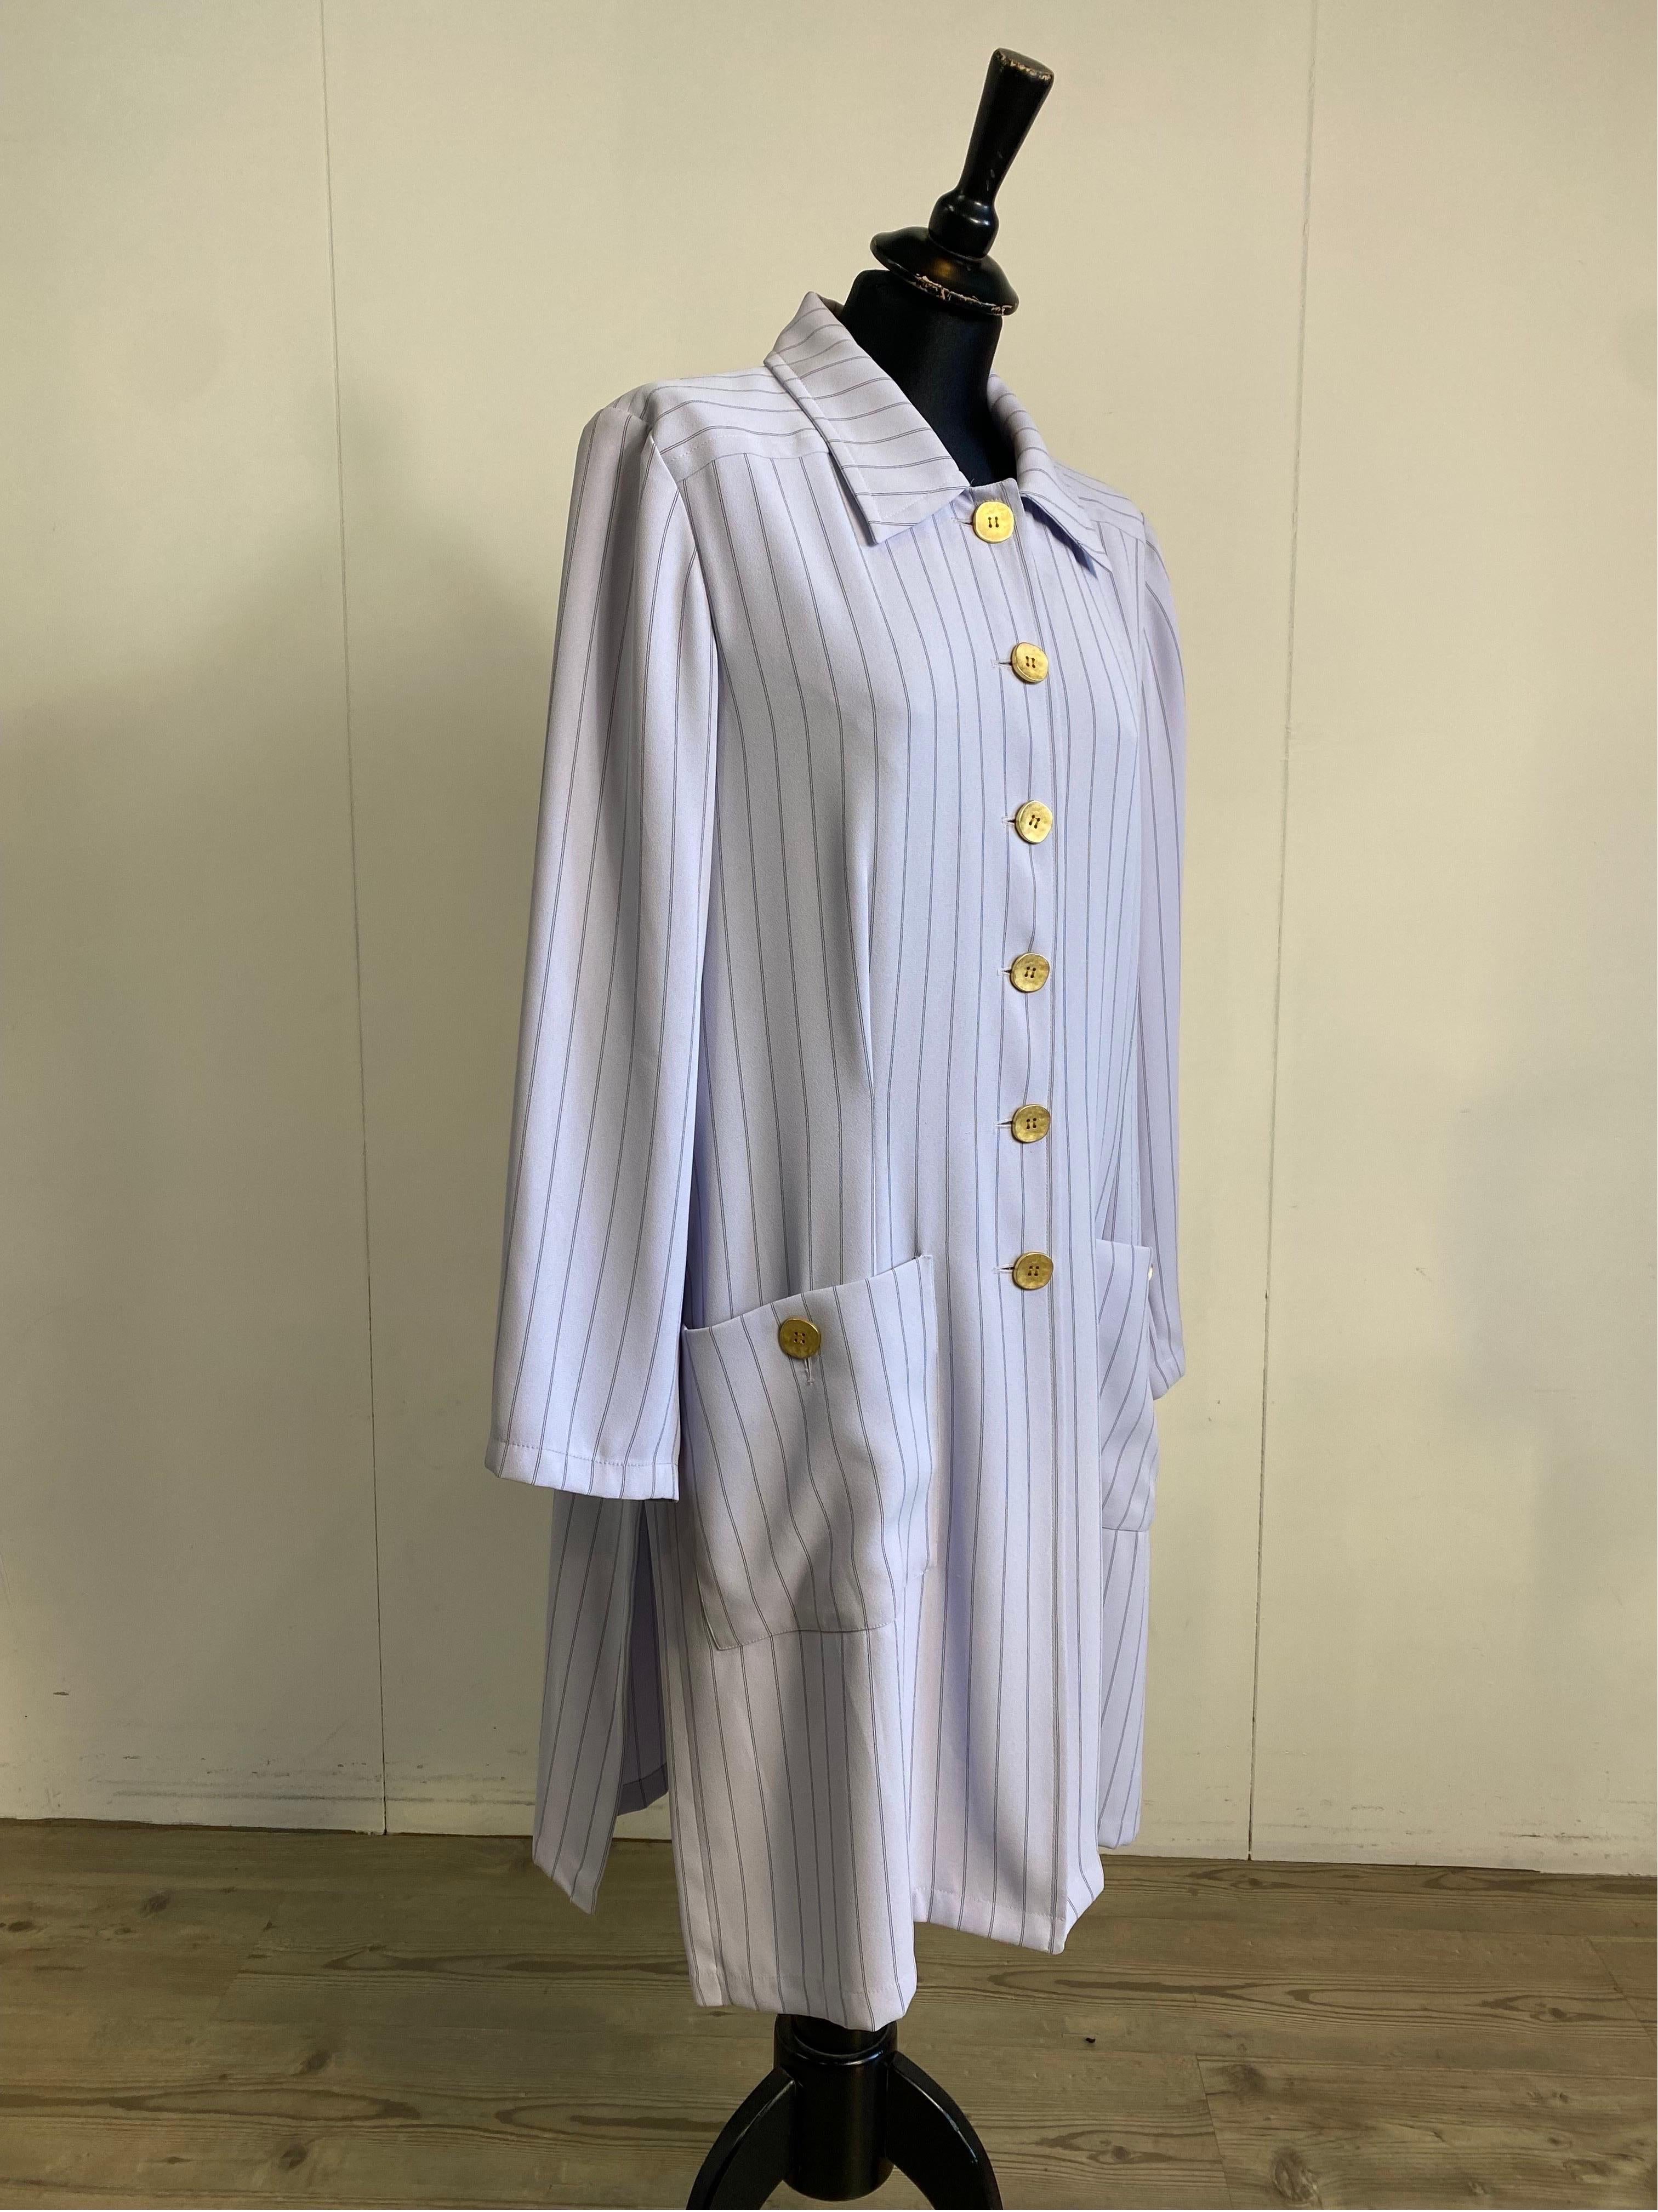 Yves Saint Laurent Variation shirt Dress In Excellent Condition For Sale In Carnate, IT